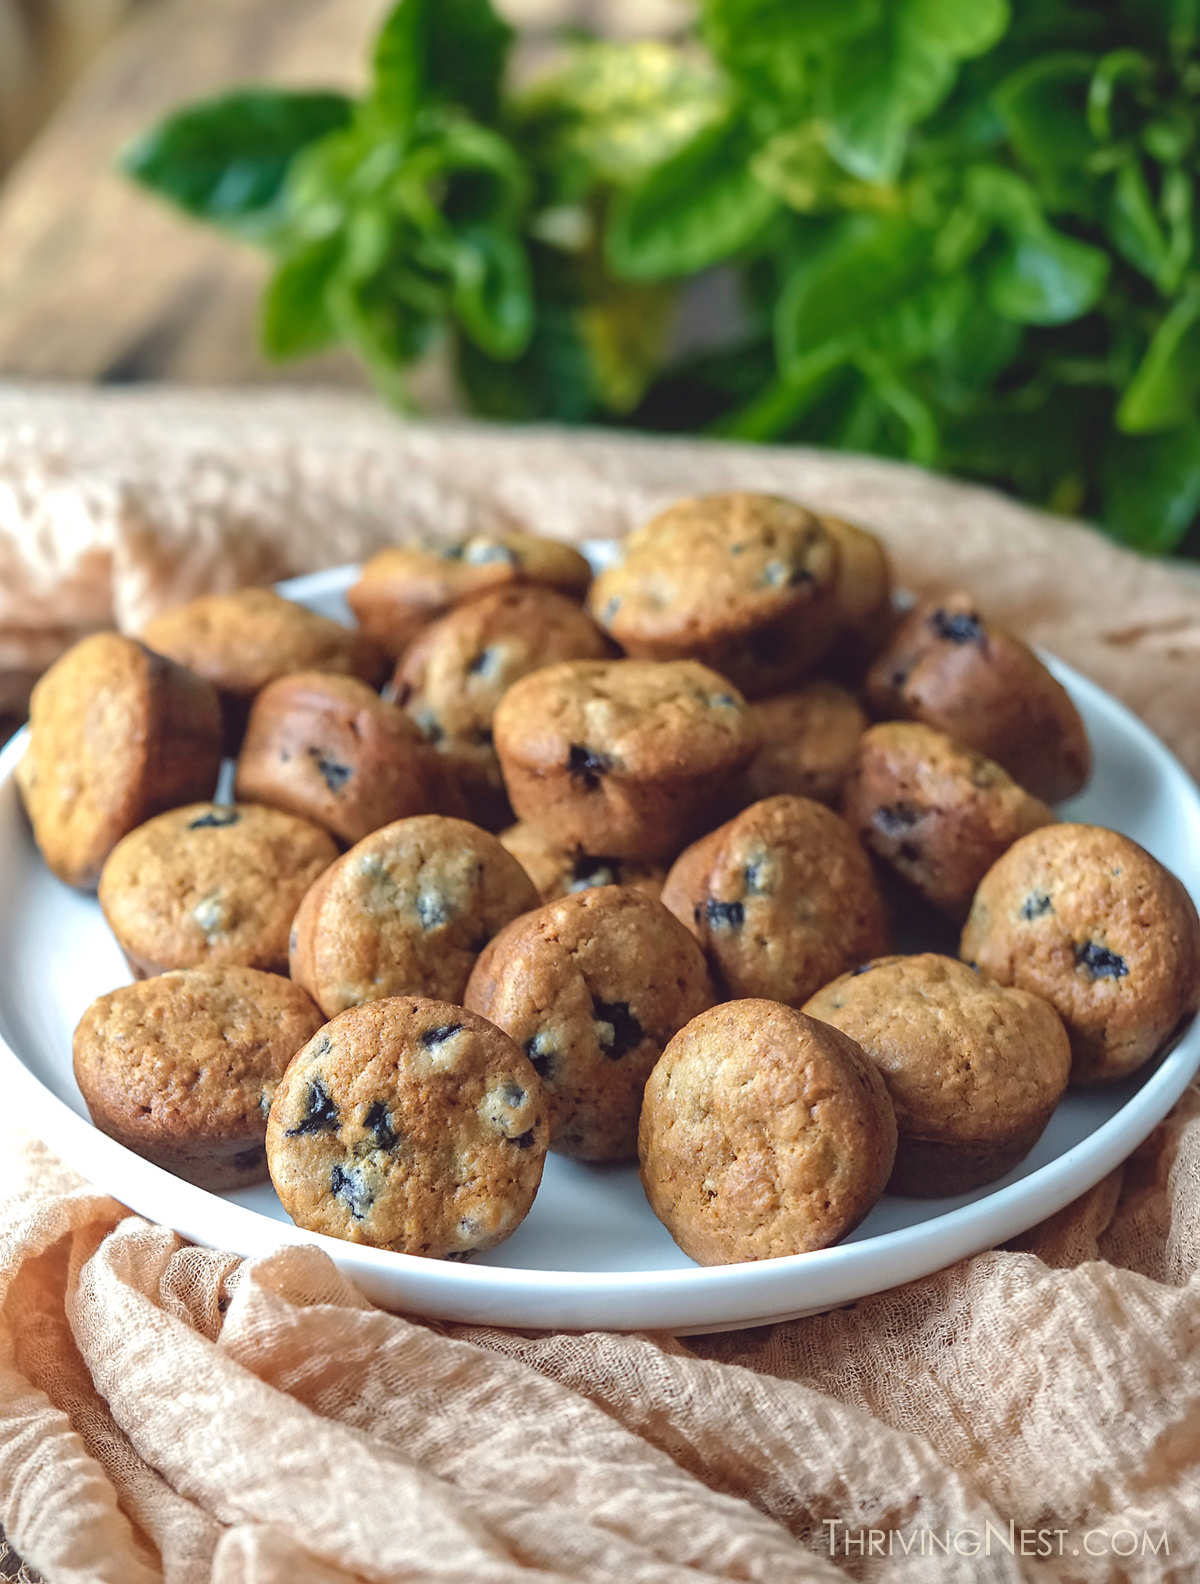 Easy baby blueberry muffins great for baby led weaning as breakfast or finger foods, toddlers and older kids will love them too.